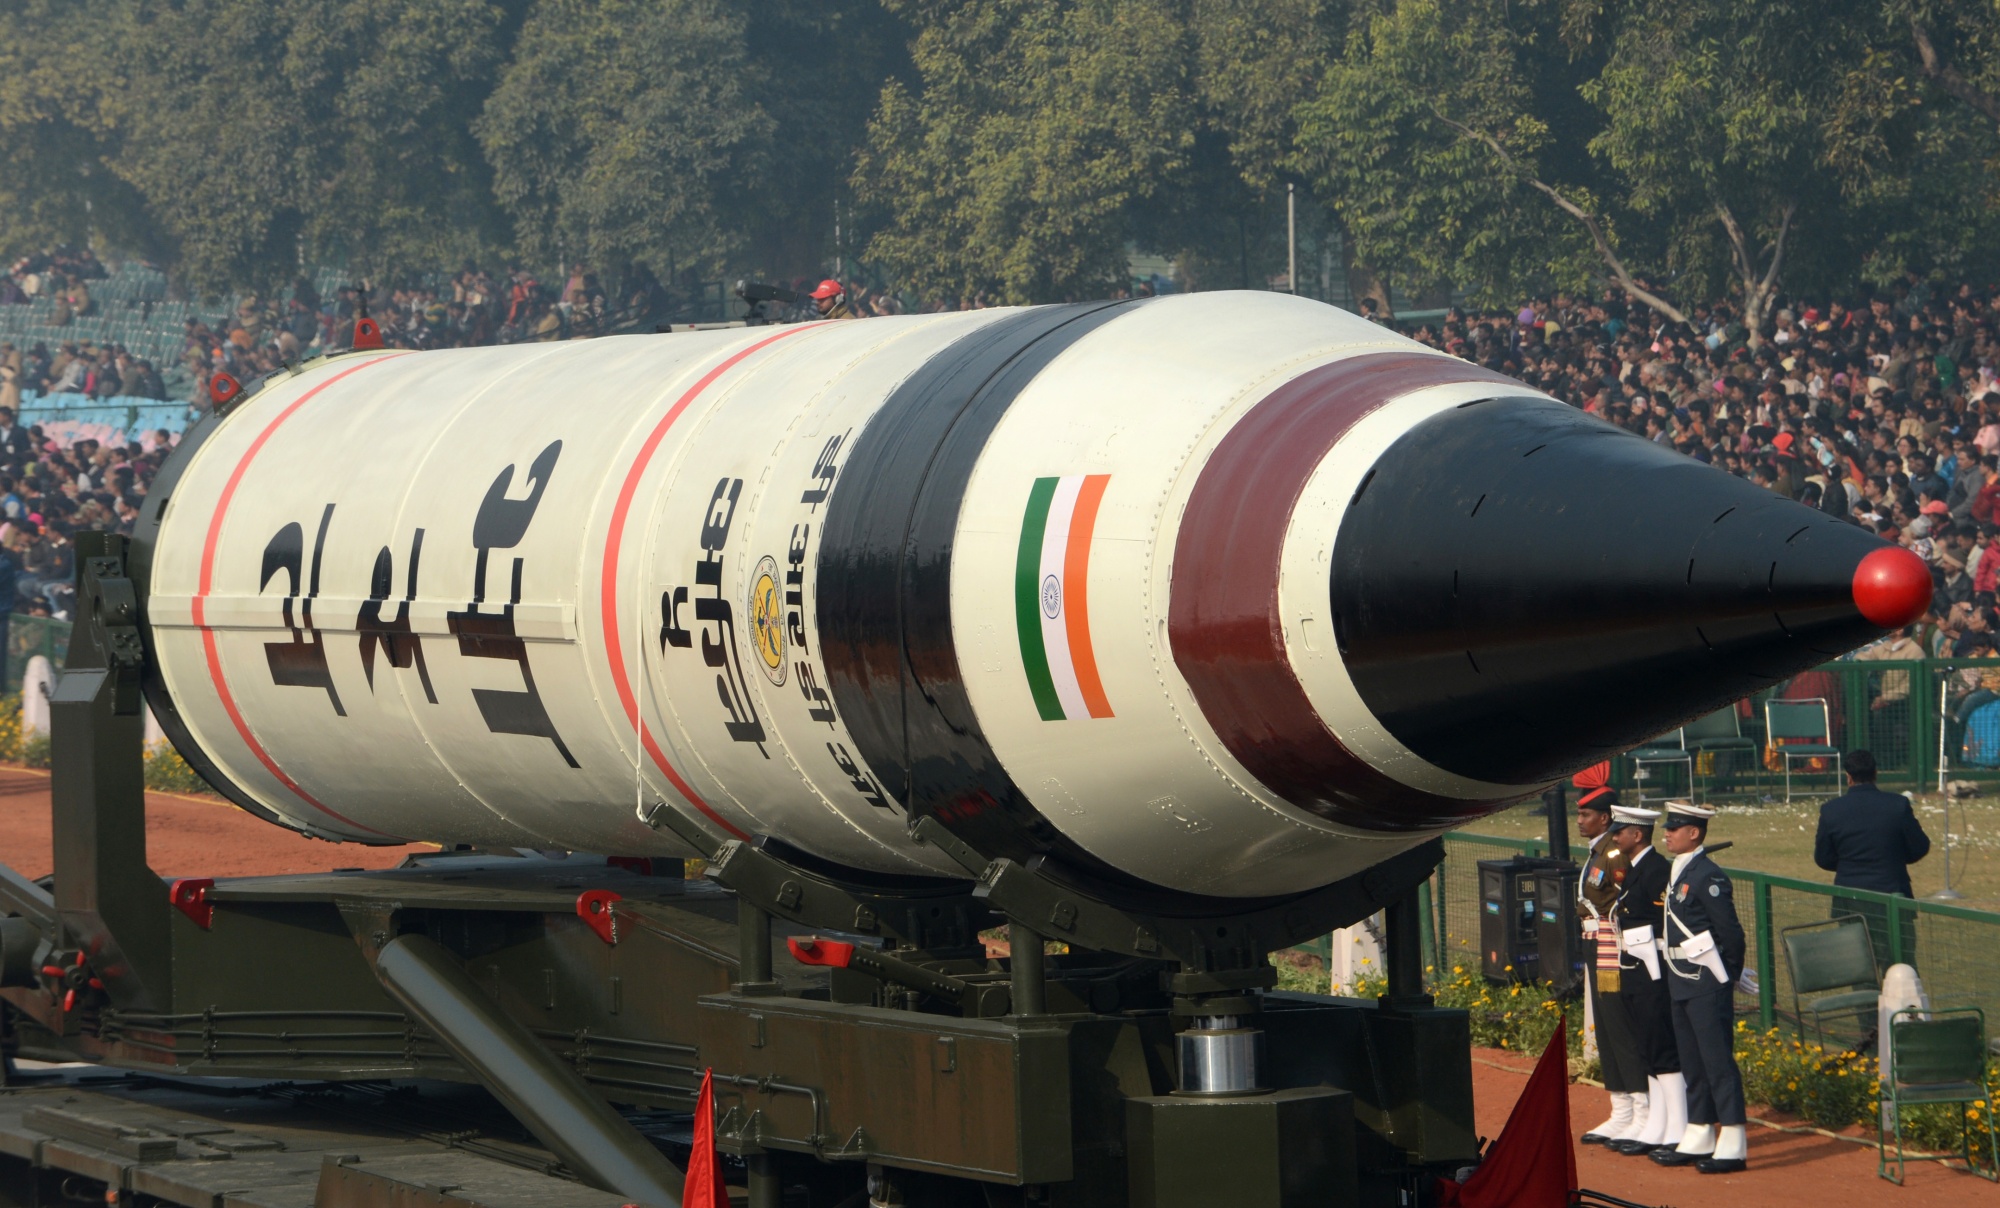 india test-fires nuclear-capable ballistic missile after china border tensions - bloomberg